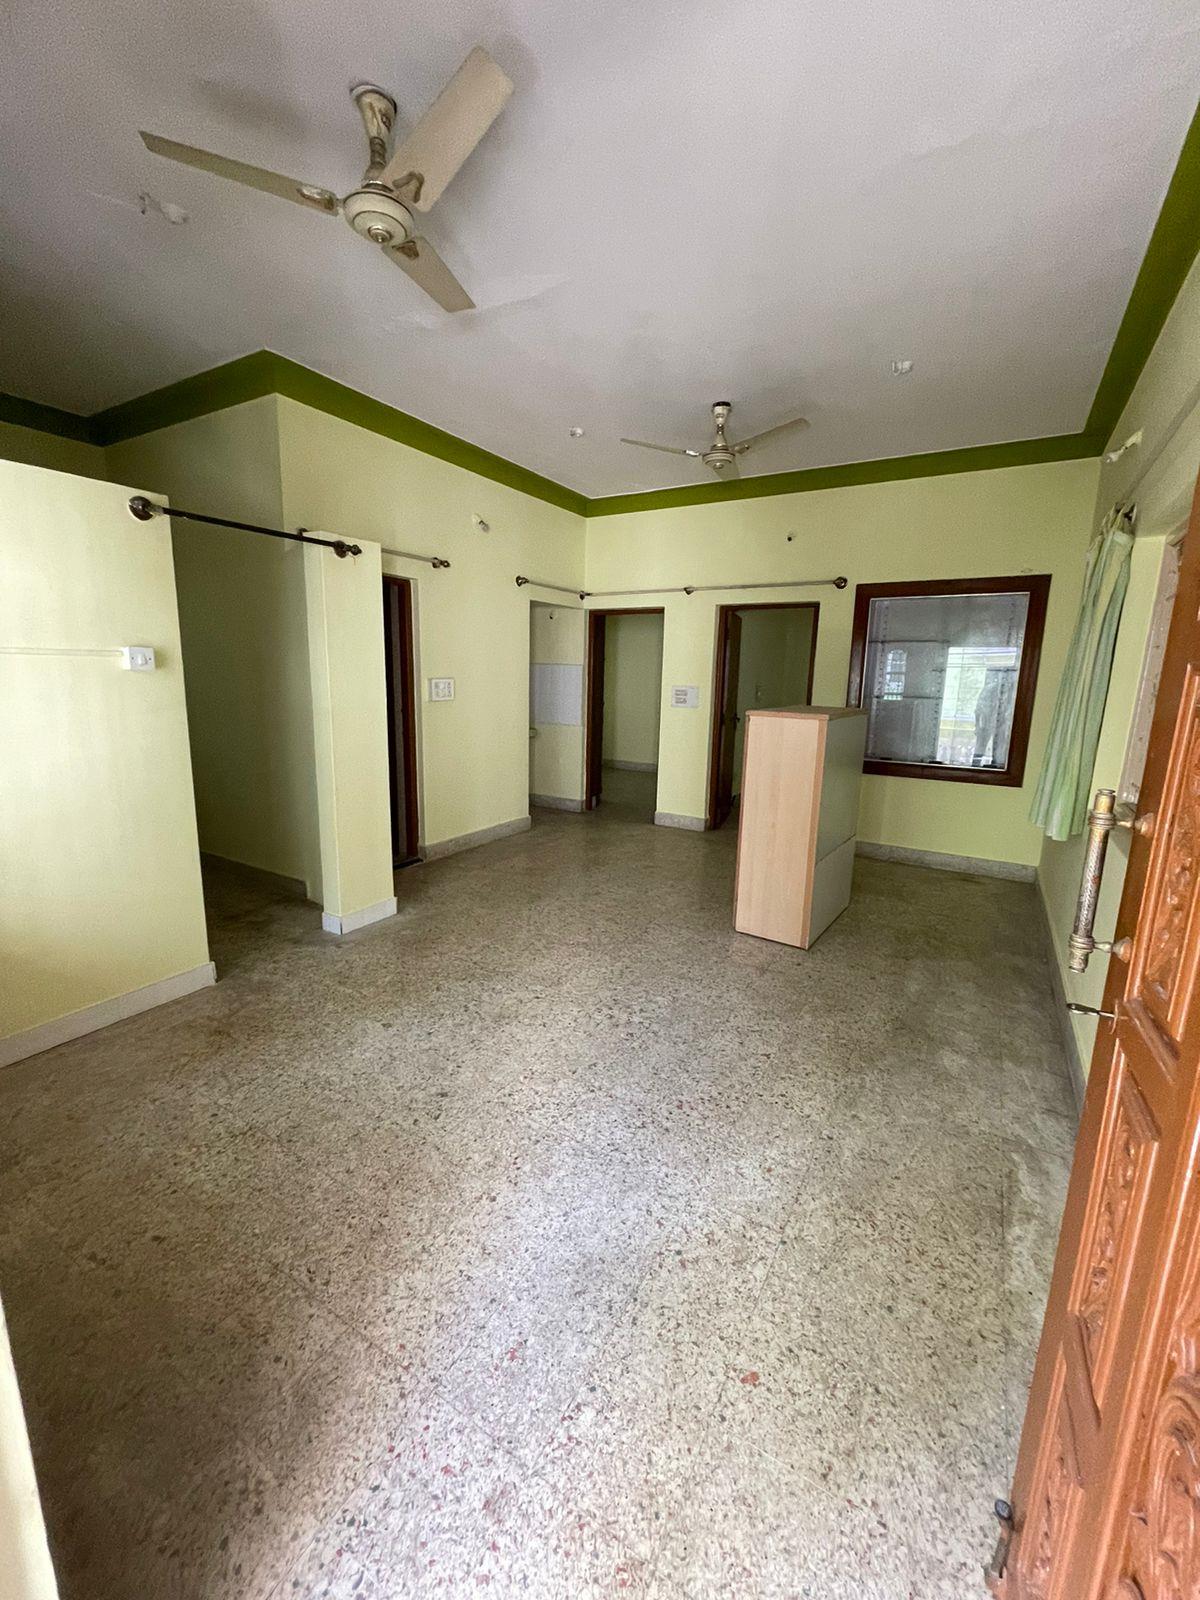 2 BHK Independent House for Lease Only at 15 Lakhs - JAML2 - 04 in Kadugodi